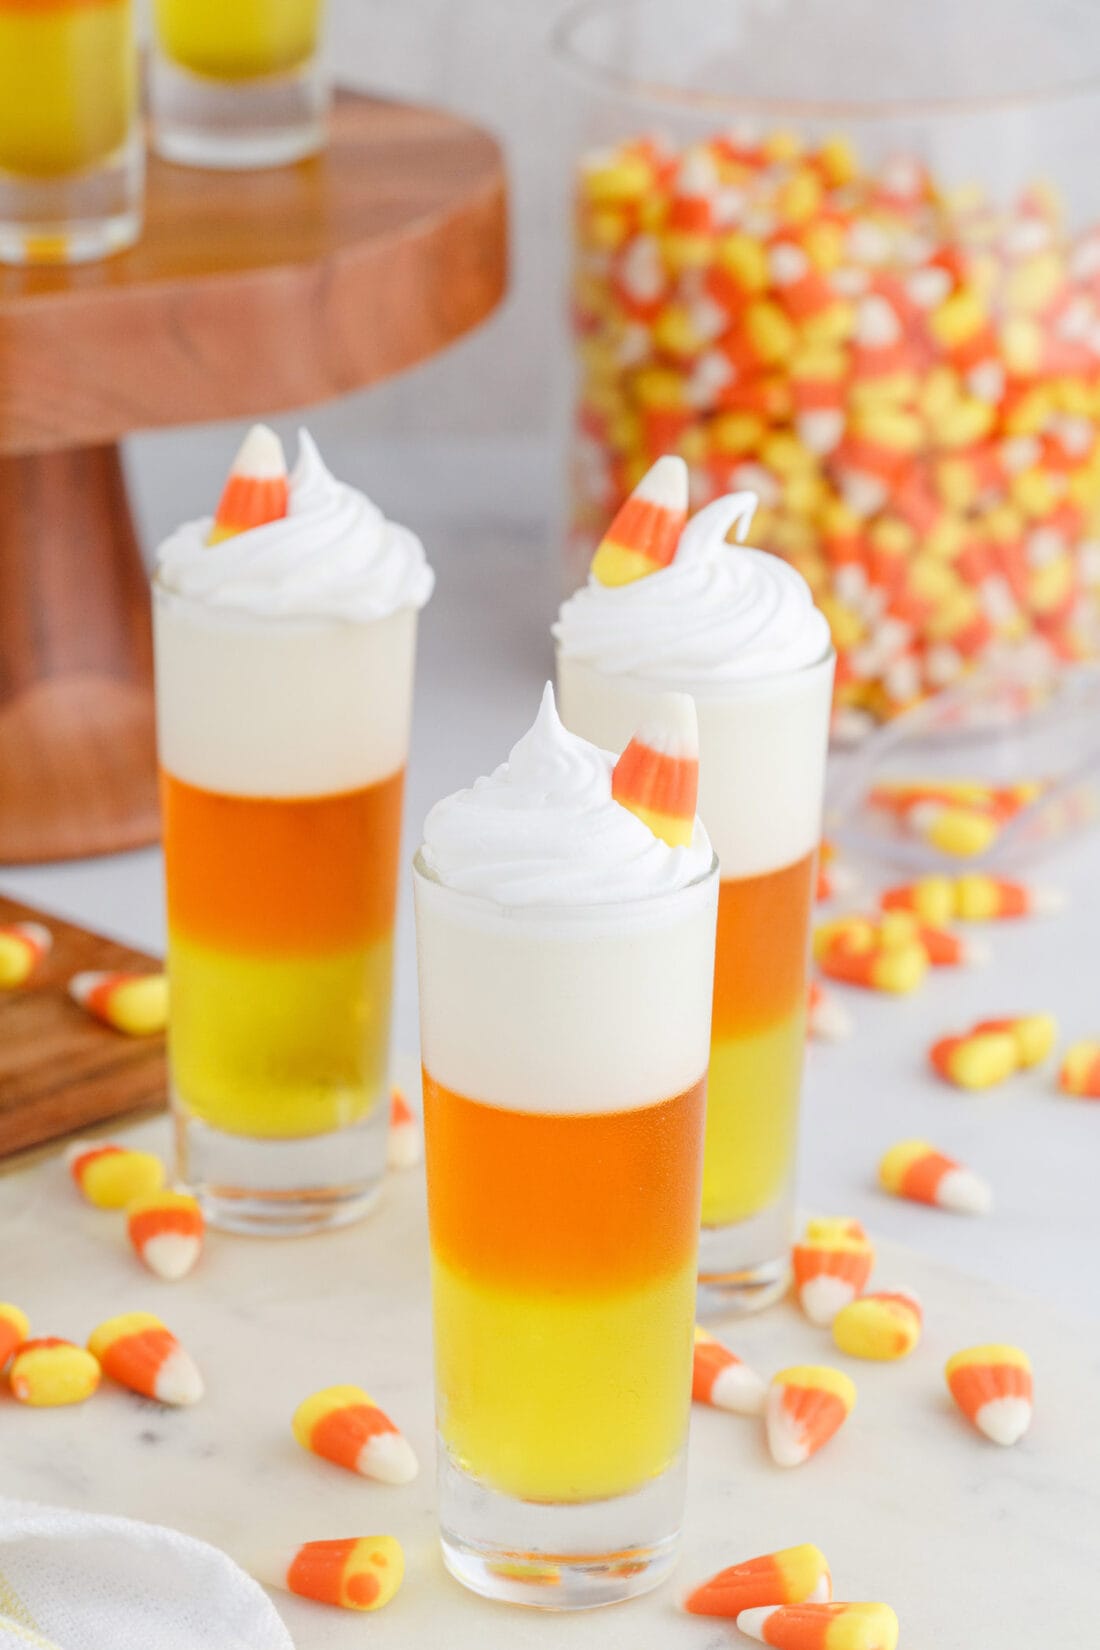 Candy Corn Jello Shots with whipped cream